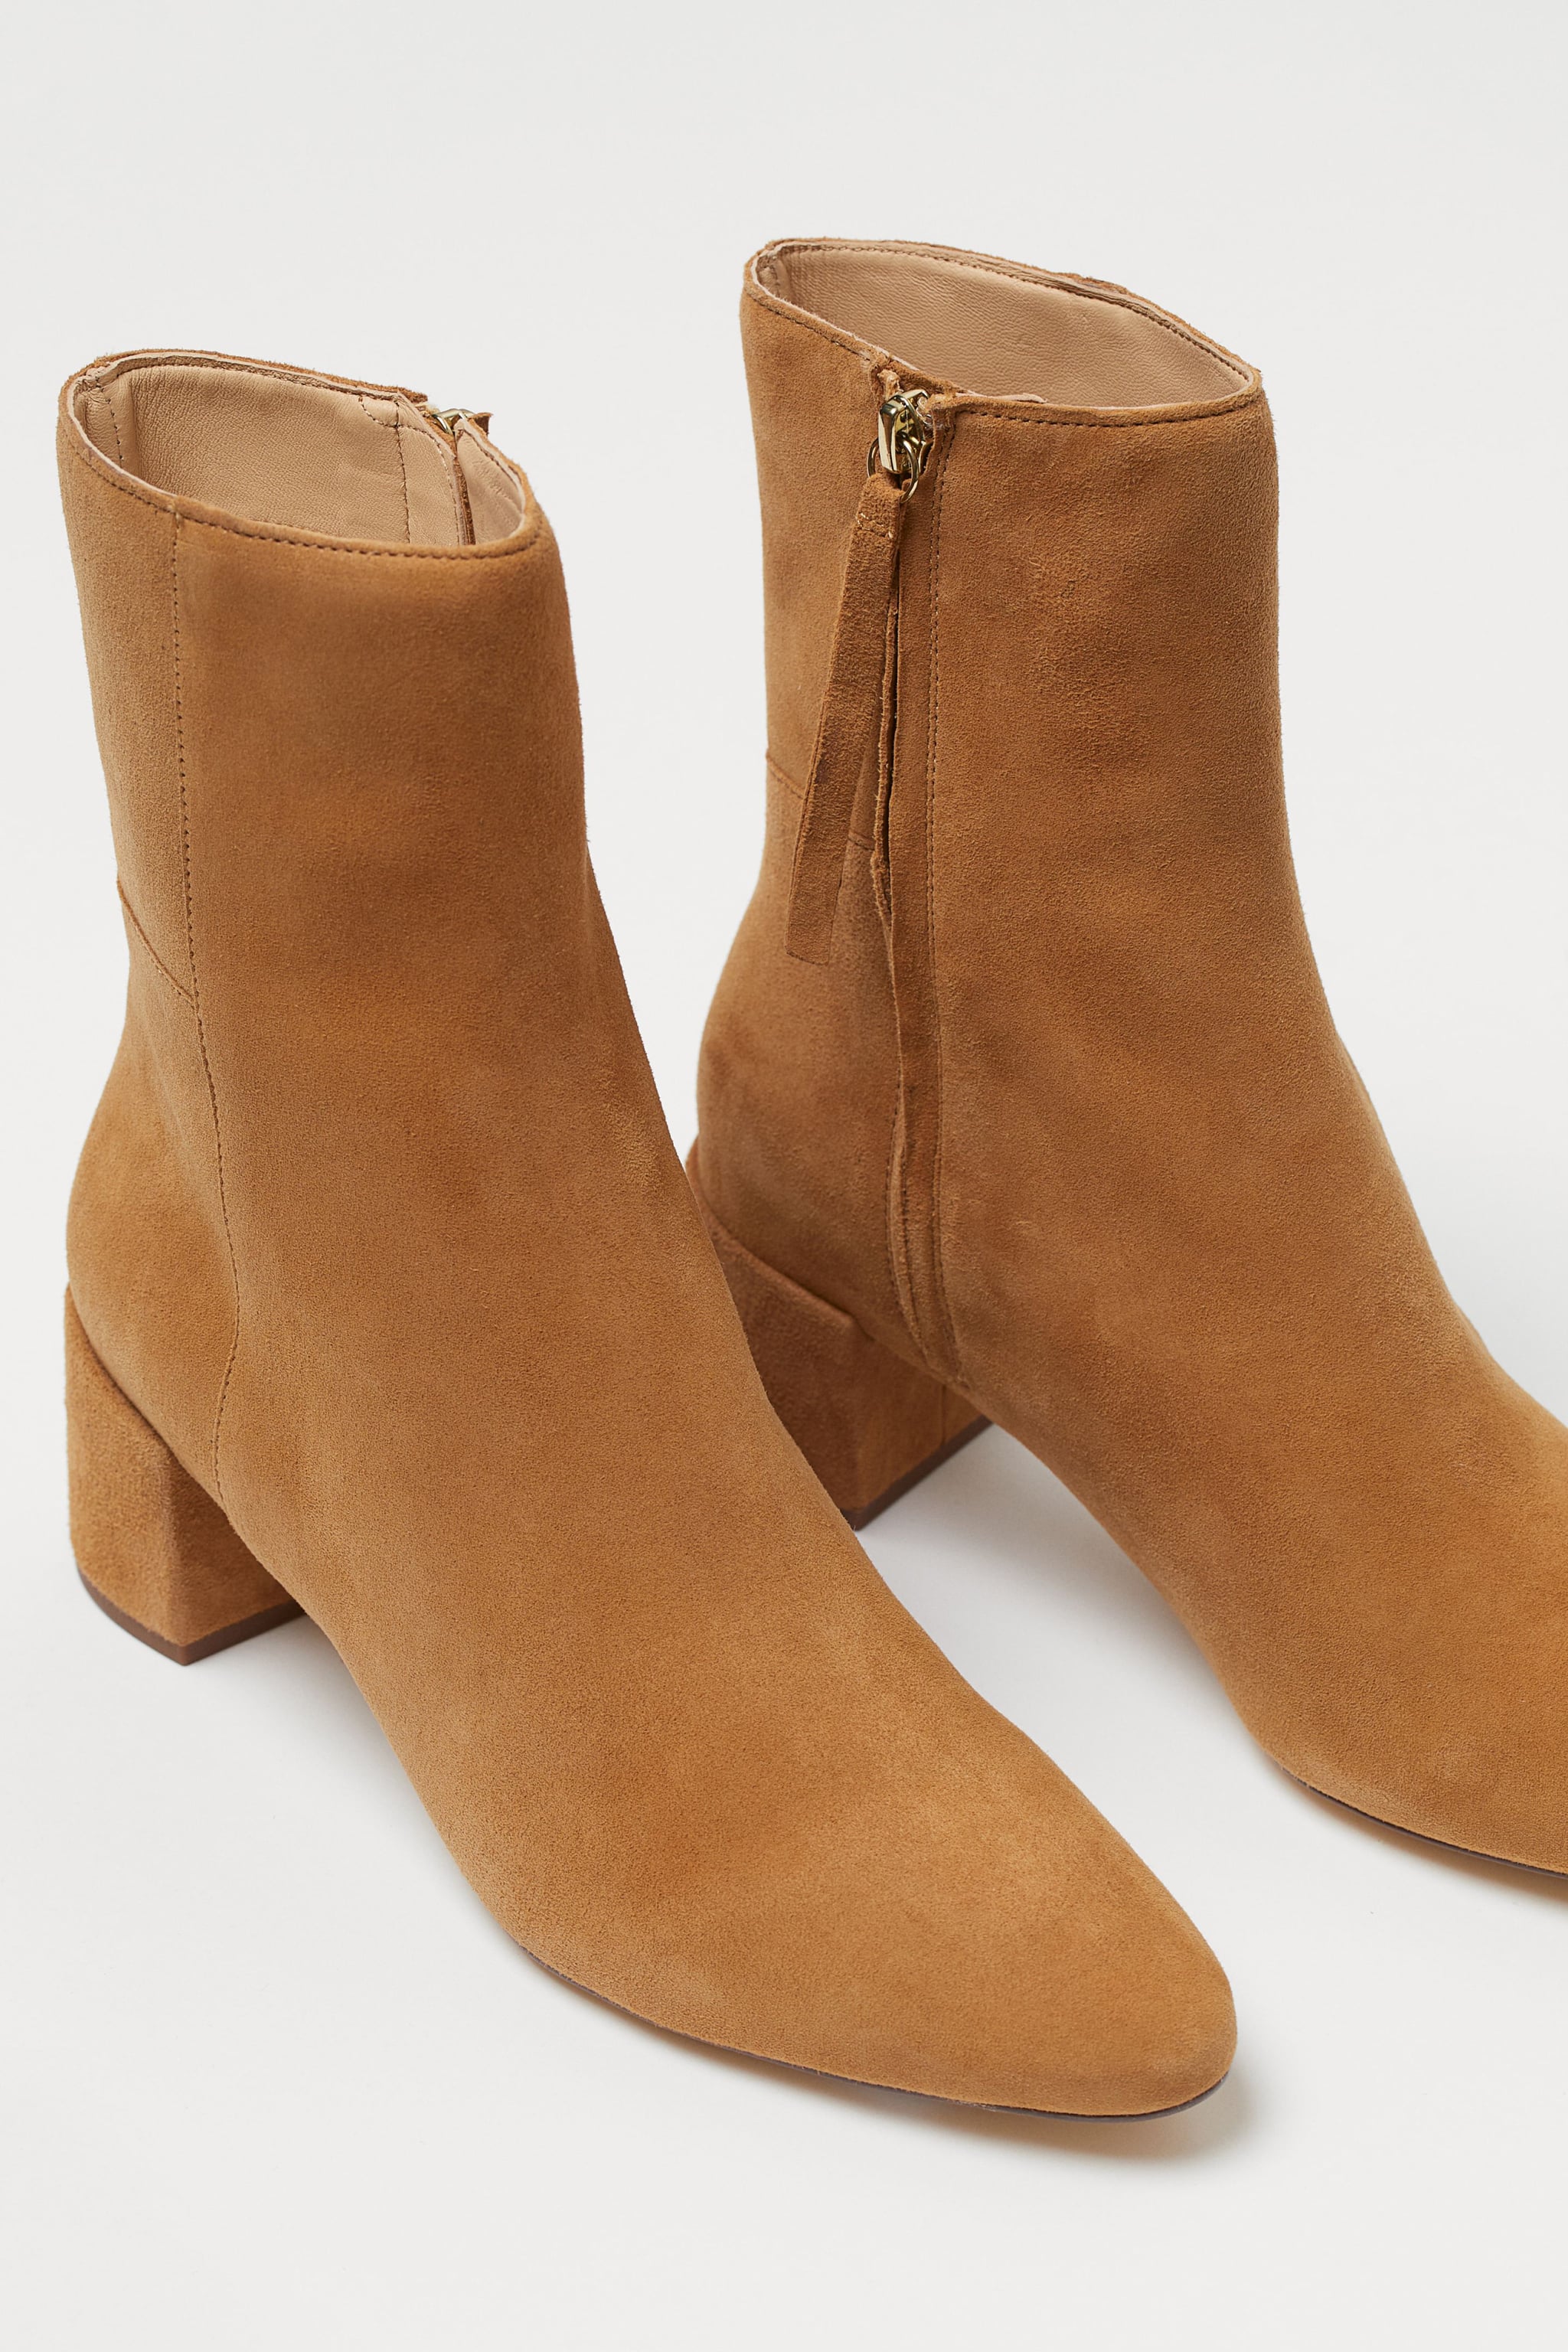 h&m ankle booties